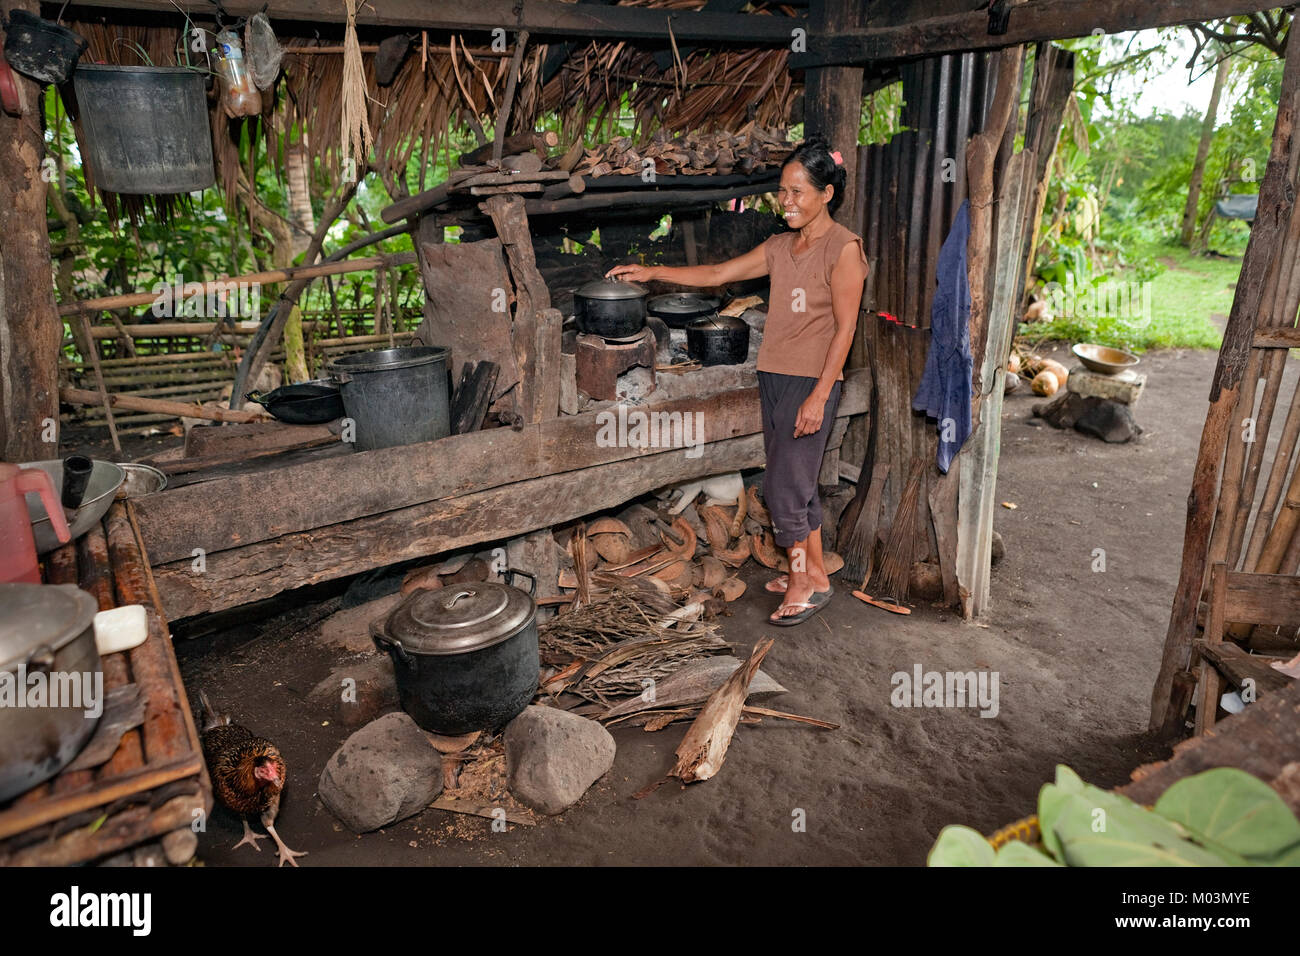 A Filipino woman cooks a meal over open flame in her outdoor 'dirty